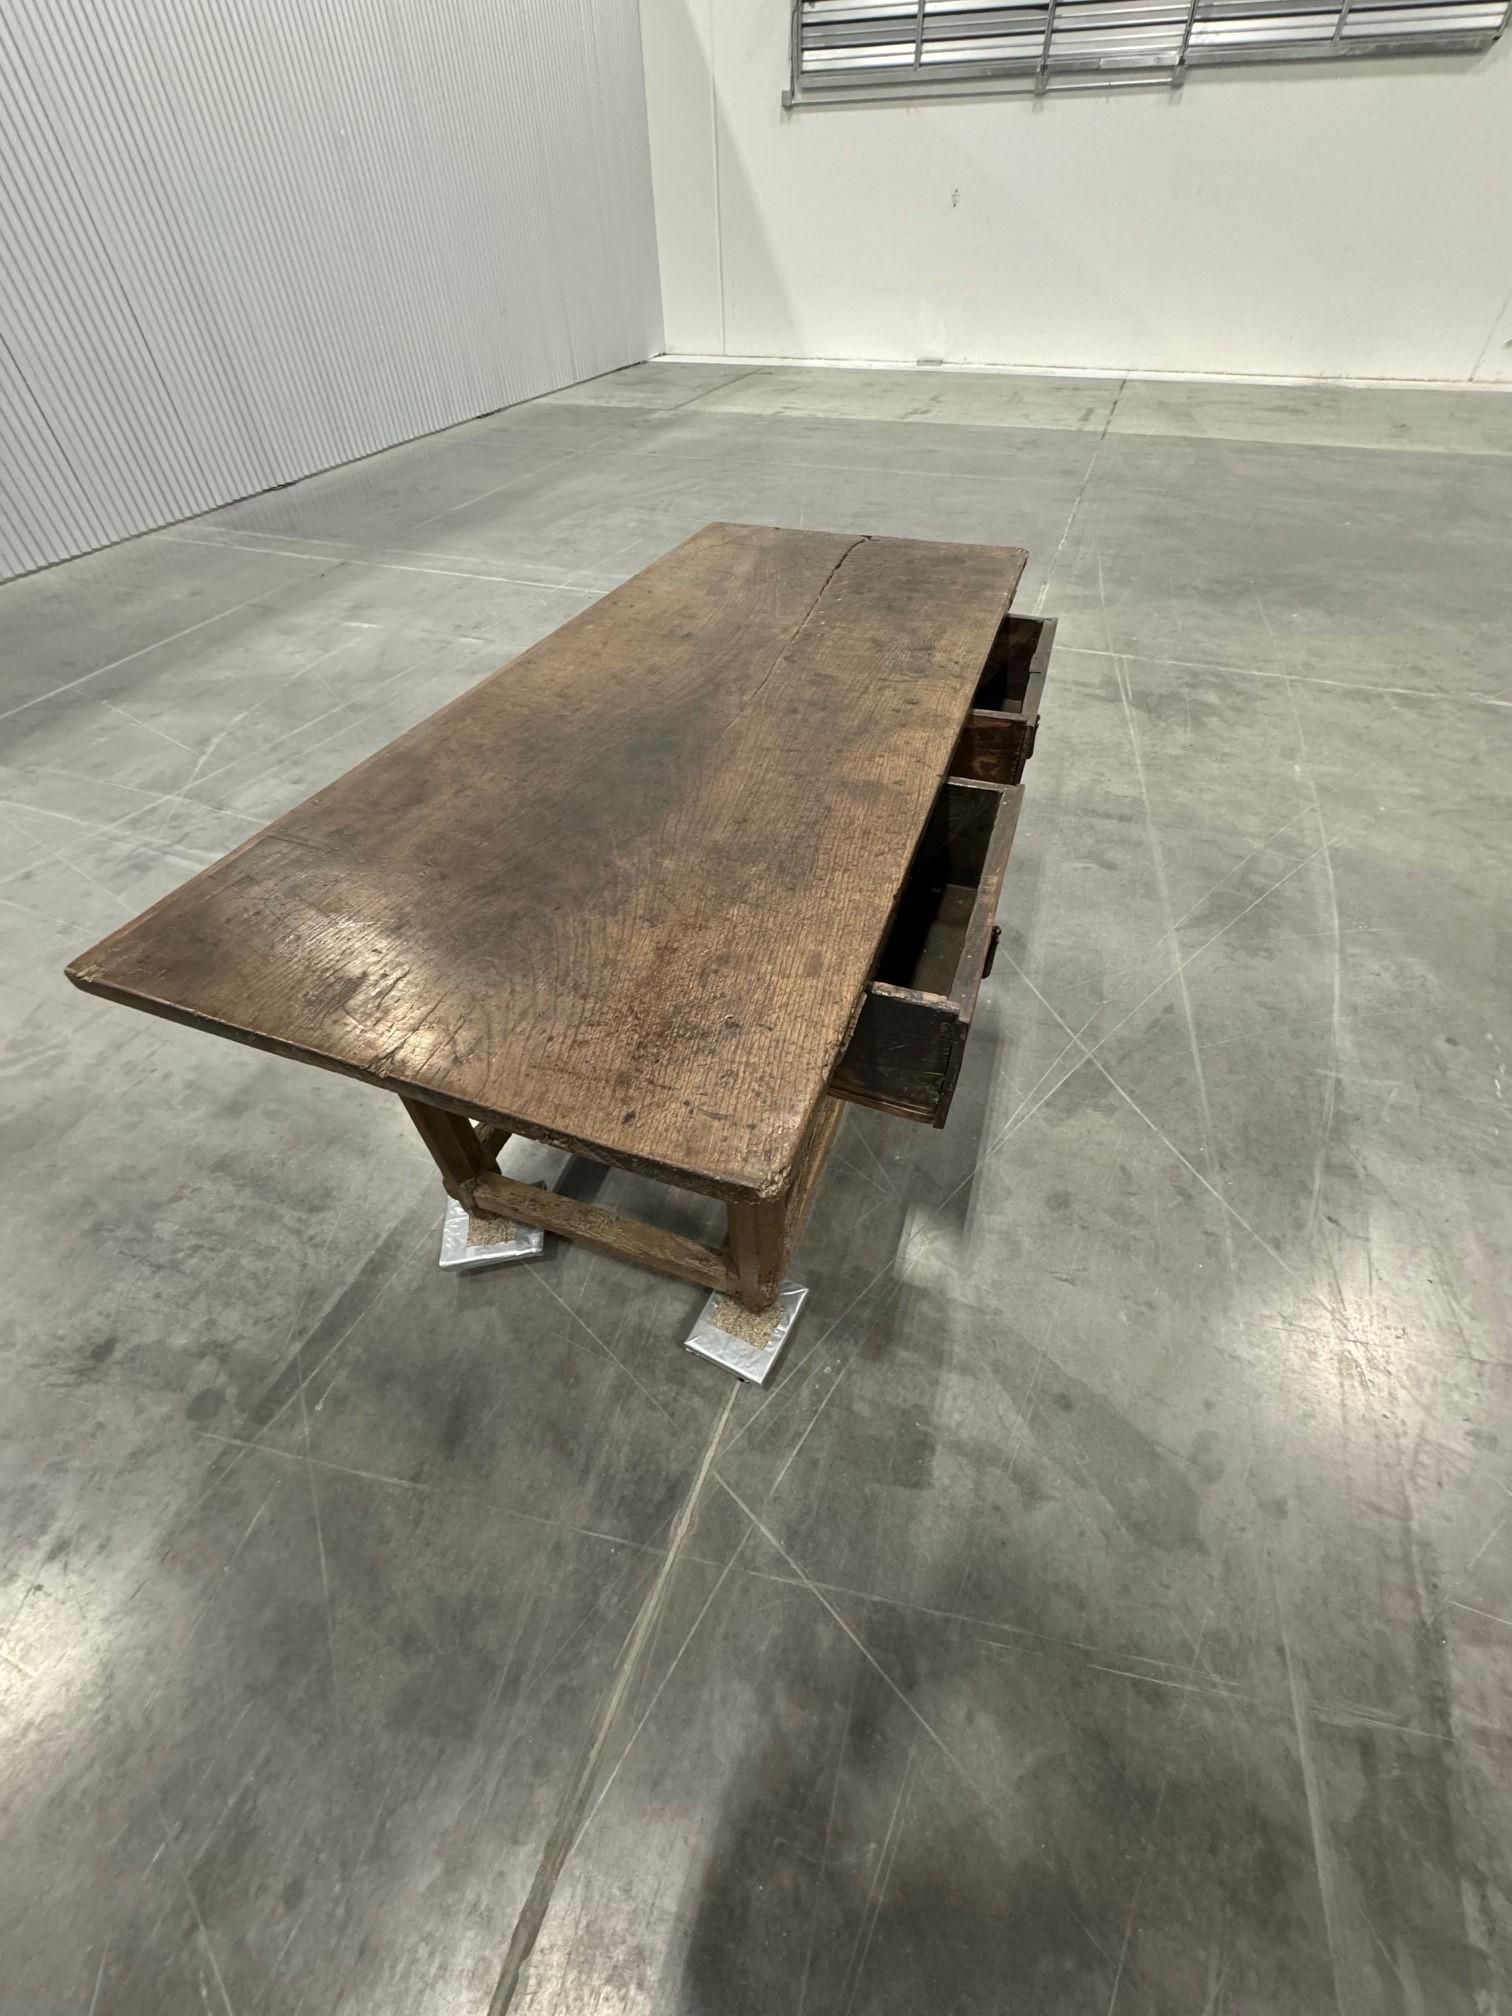 Spanish Tavern / Refectory Table Circa 1650 In Distressed Condition For Sale In Flower Mound, TX